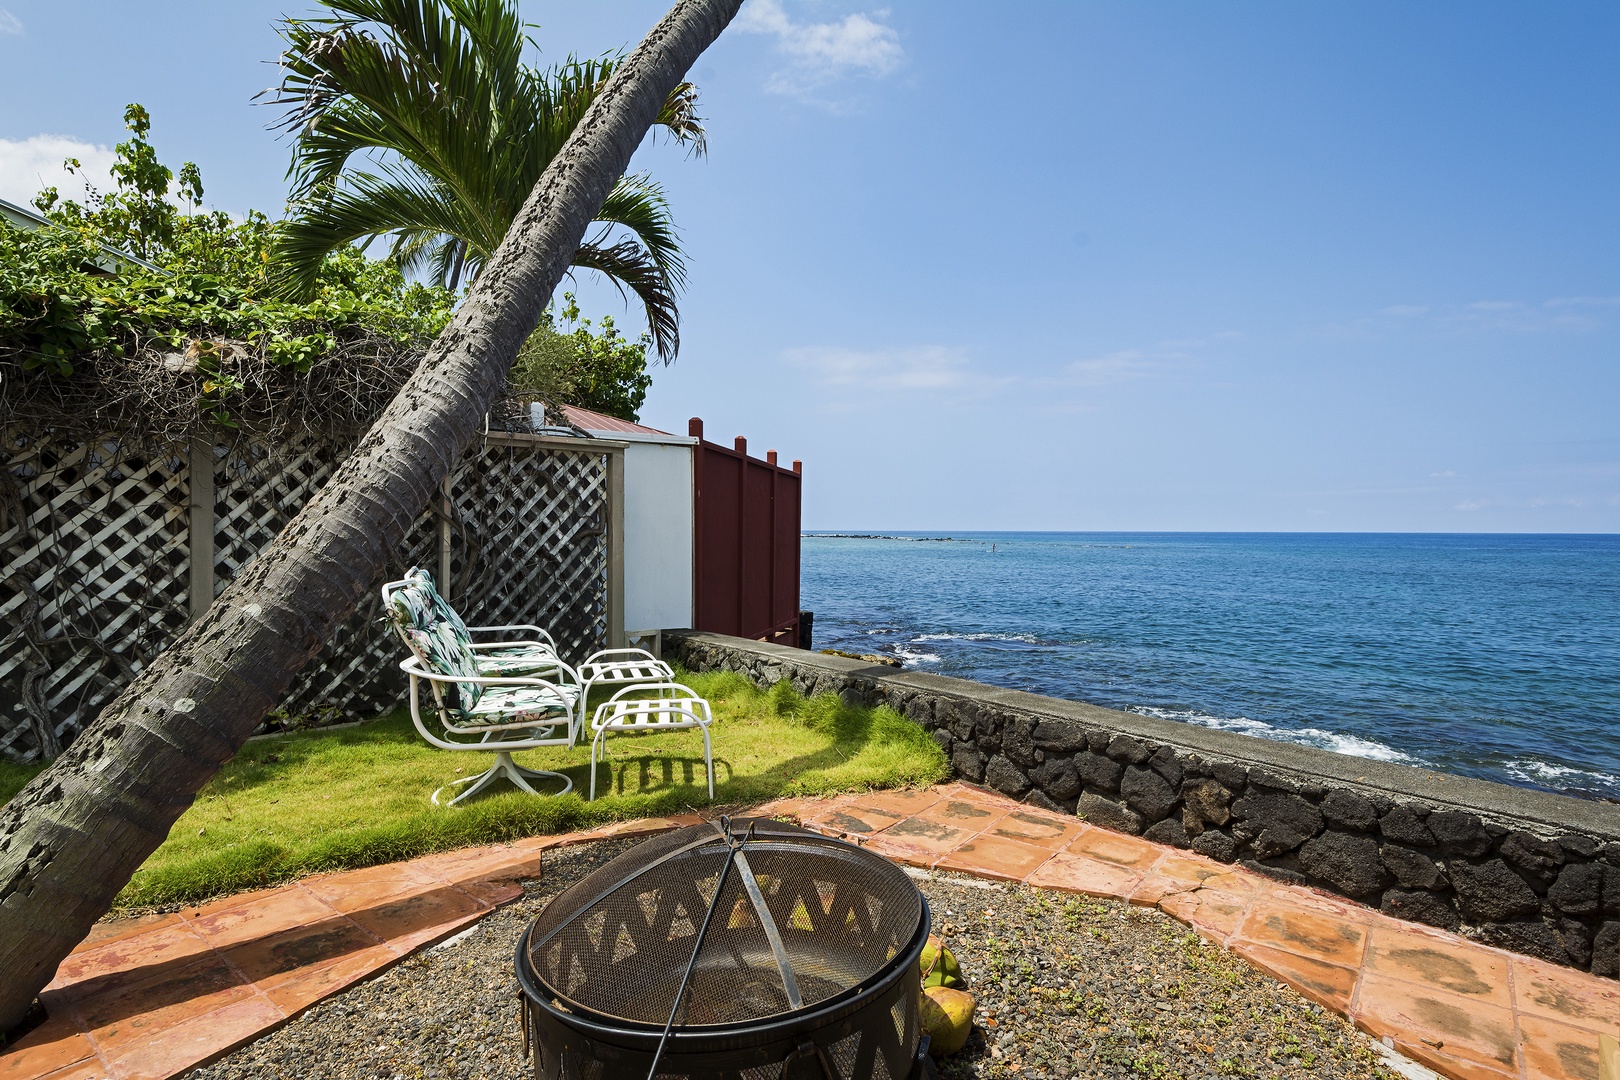 Kailua Kona Vacation Rentals, The Cottage - Small fire pit for our guests careful enjoyment